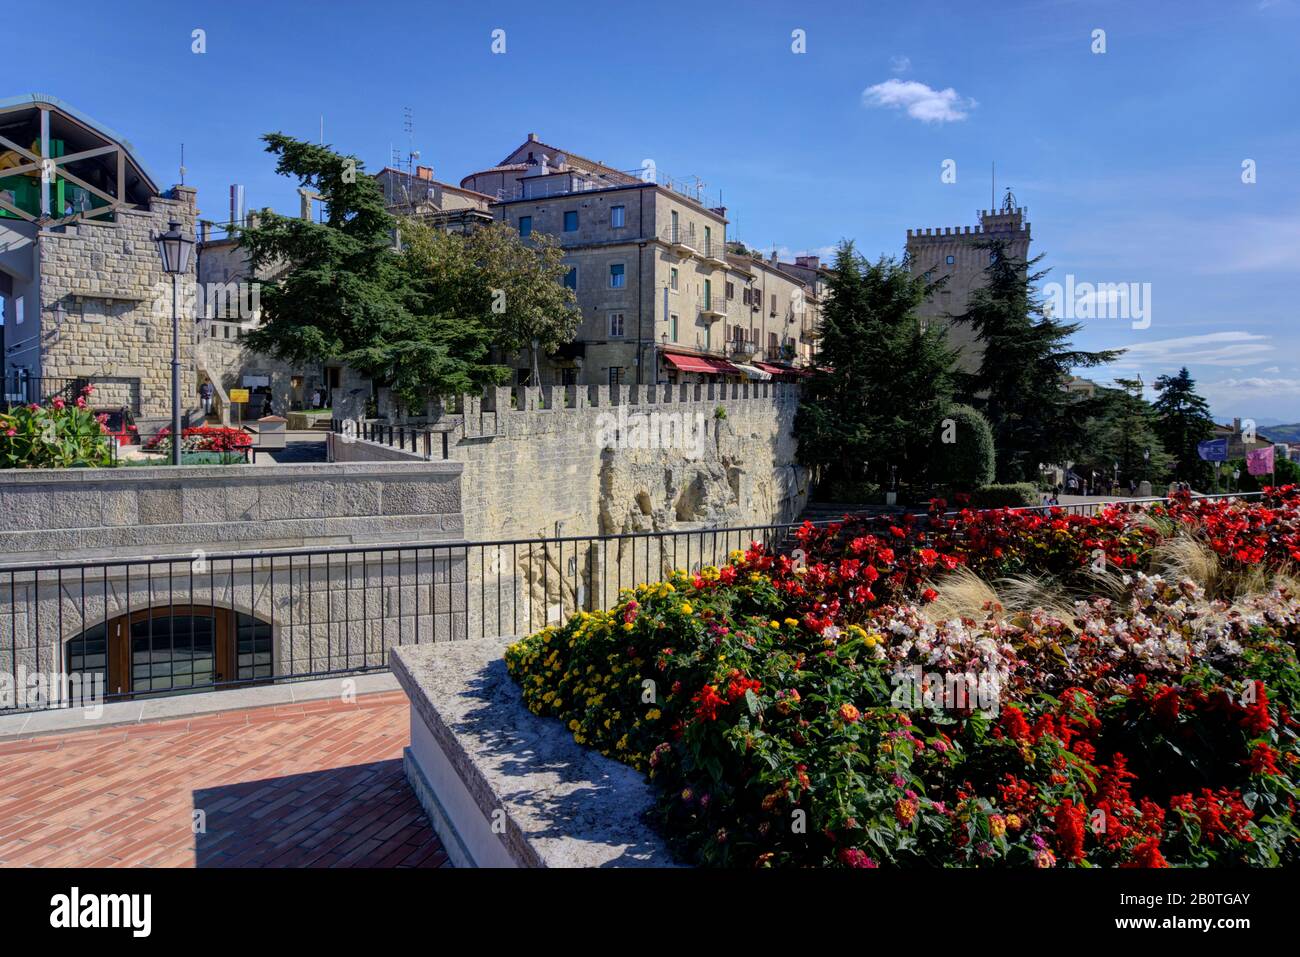 San Marino, San Marino - October 19, 2019: Scenic across viewing platform towards old stone built structures showing colorful flowers and tourists Stock Photo